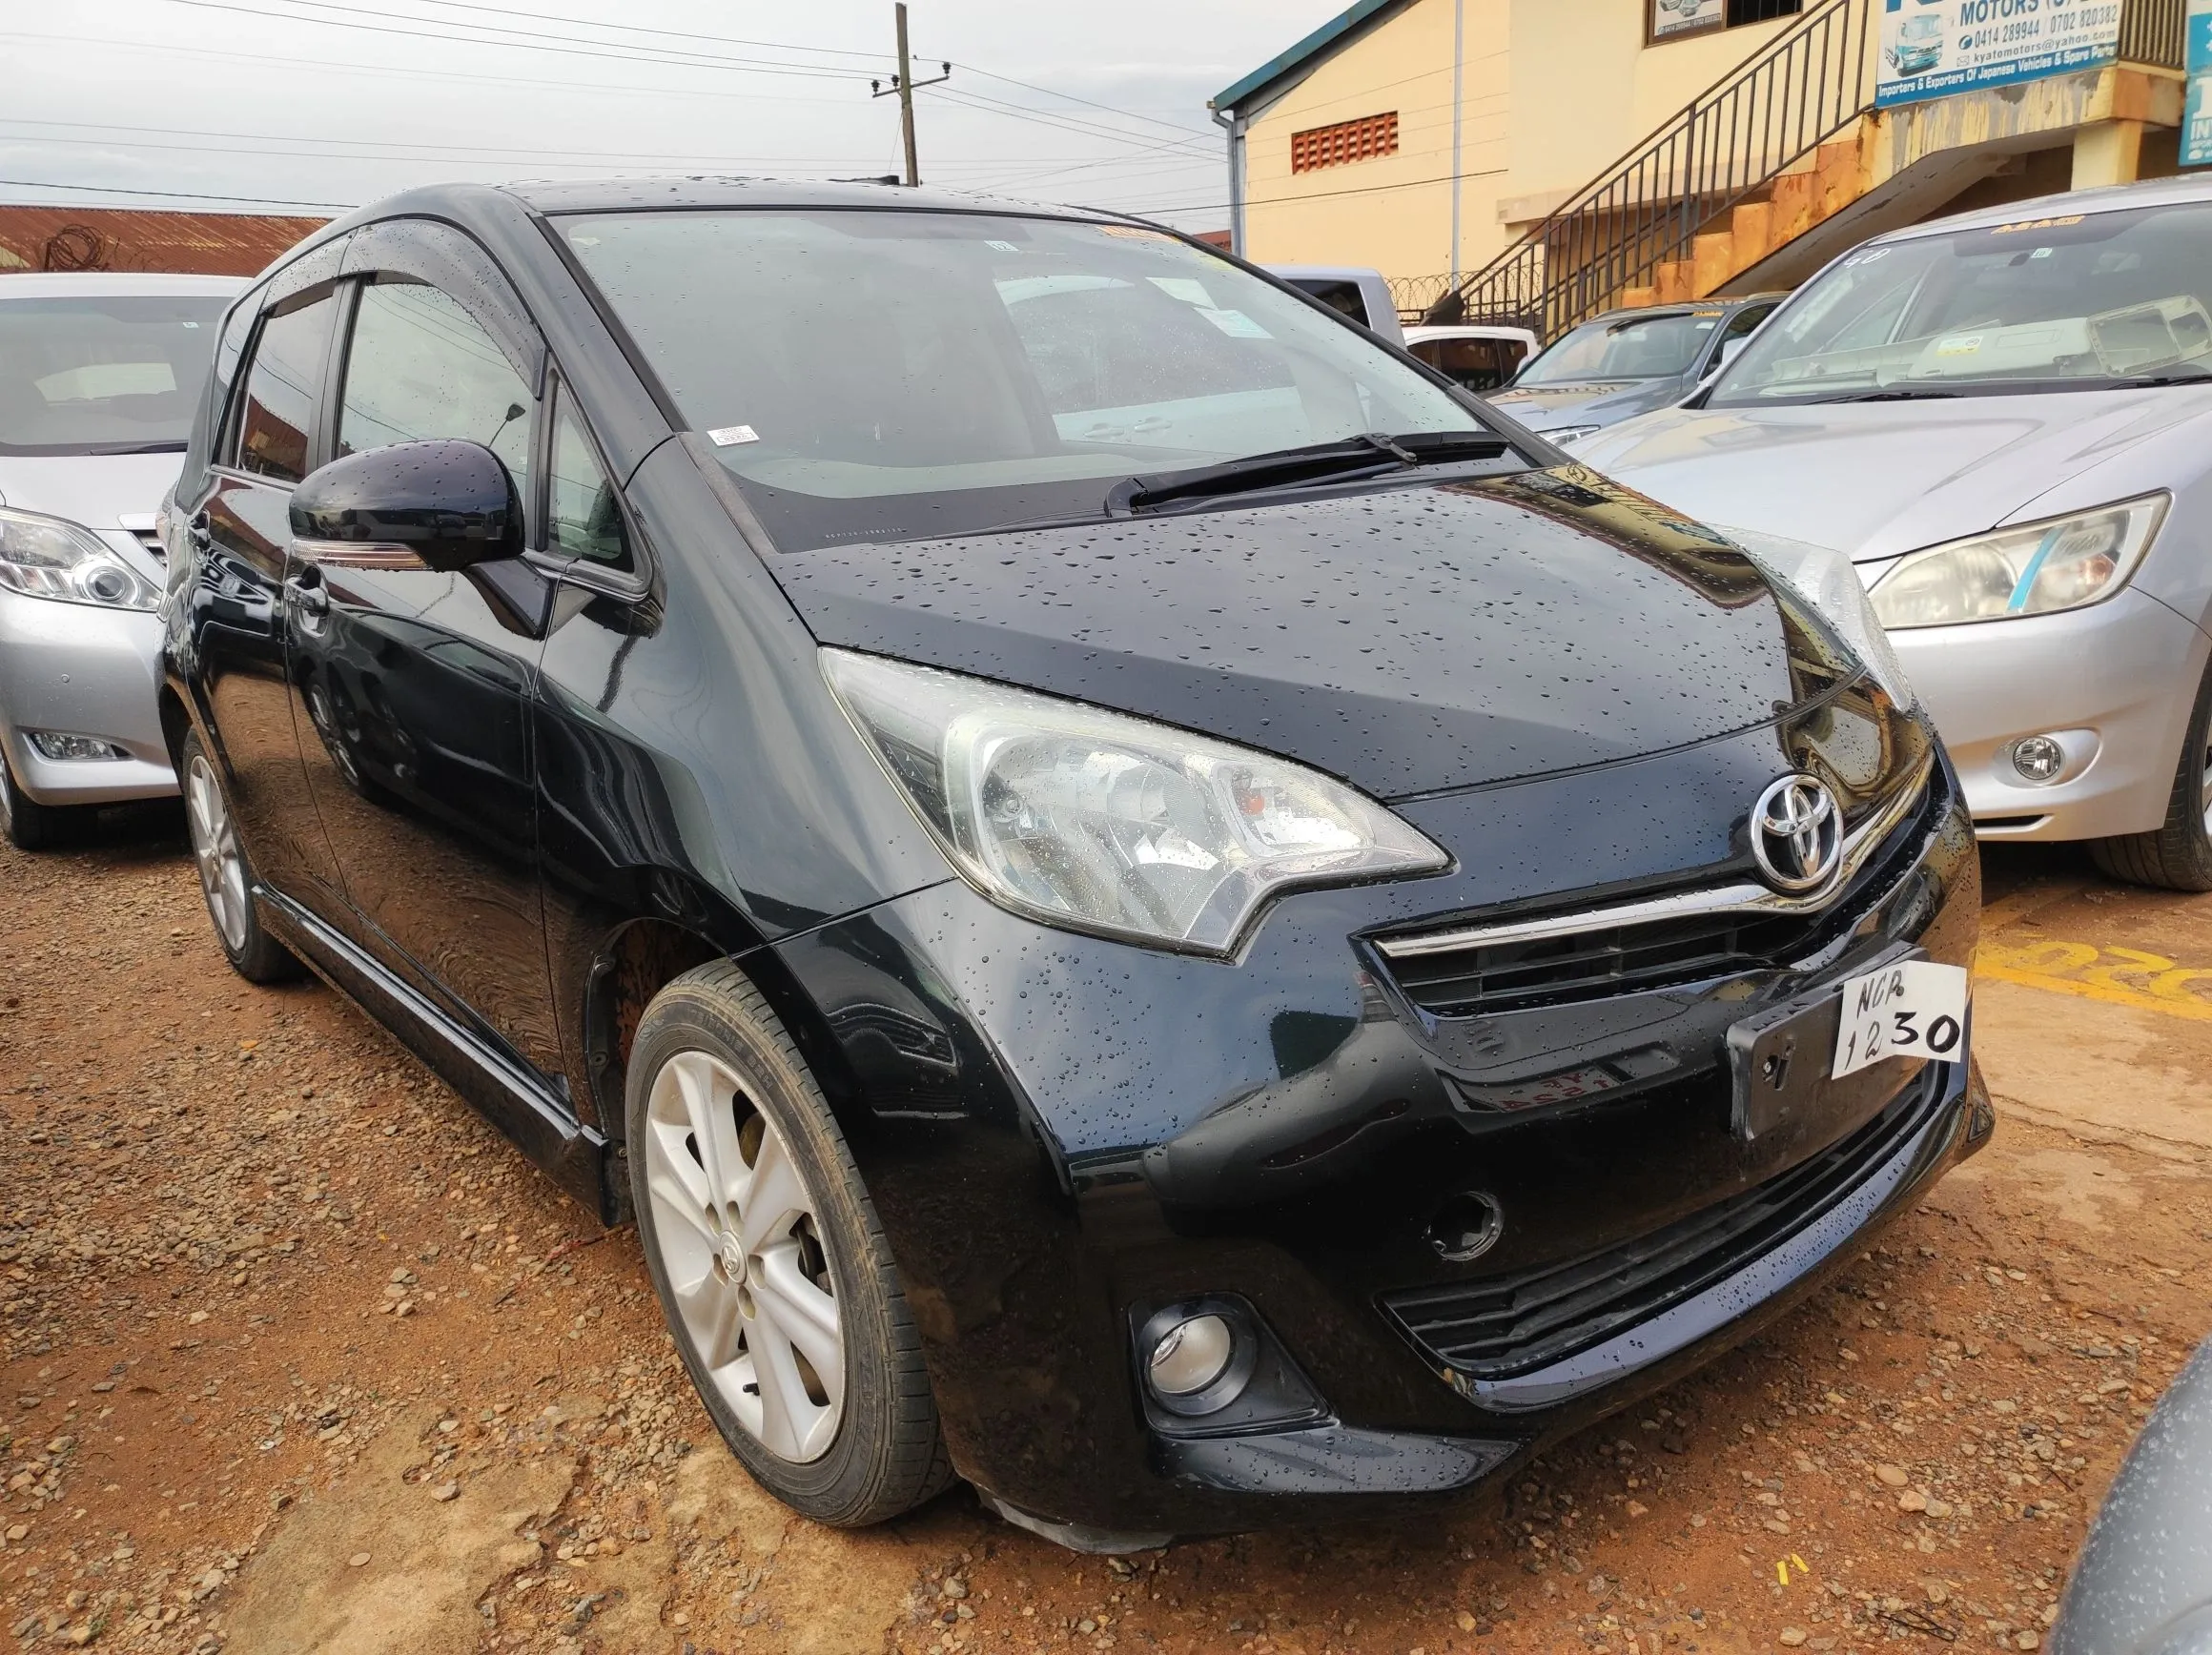 Foreign Used Toyota Ractis 2009 In Kampala. See Car Prices, Images